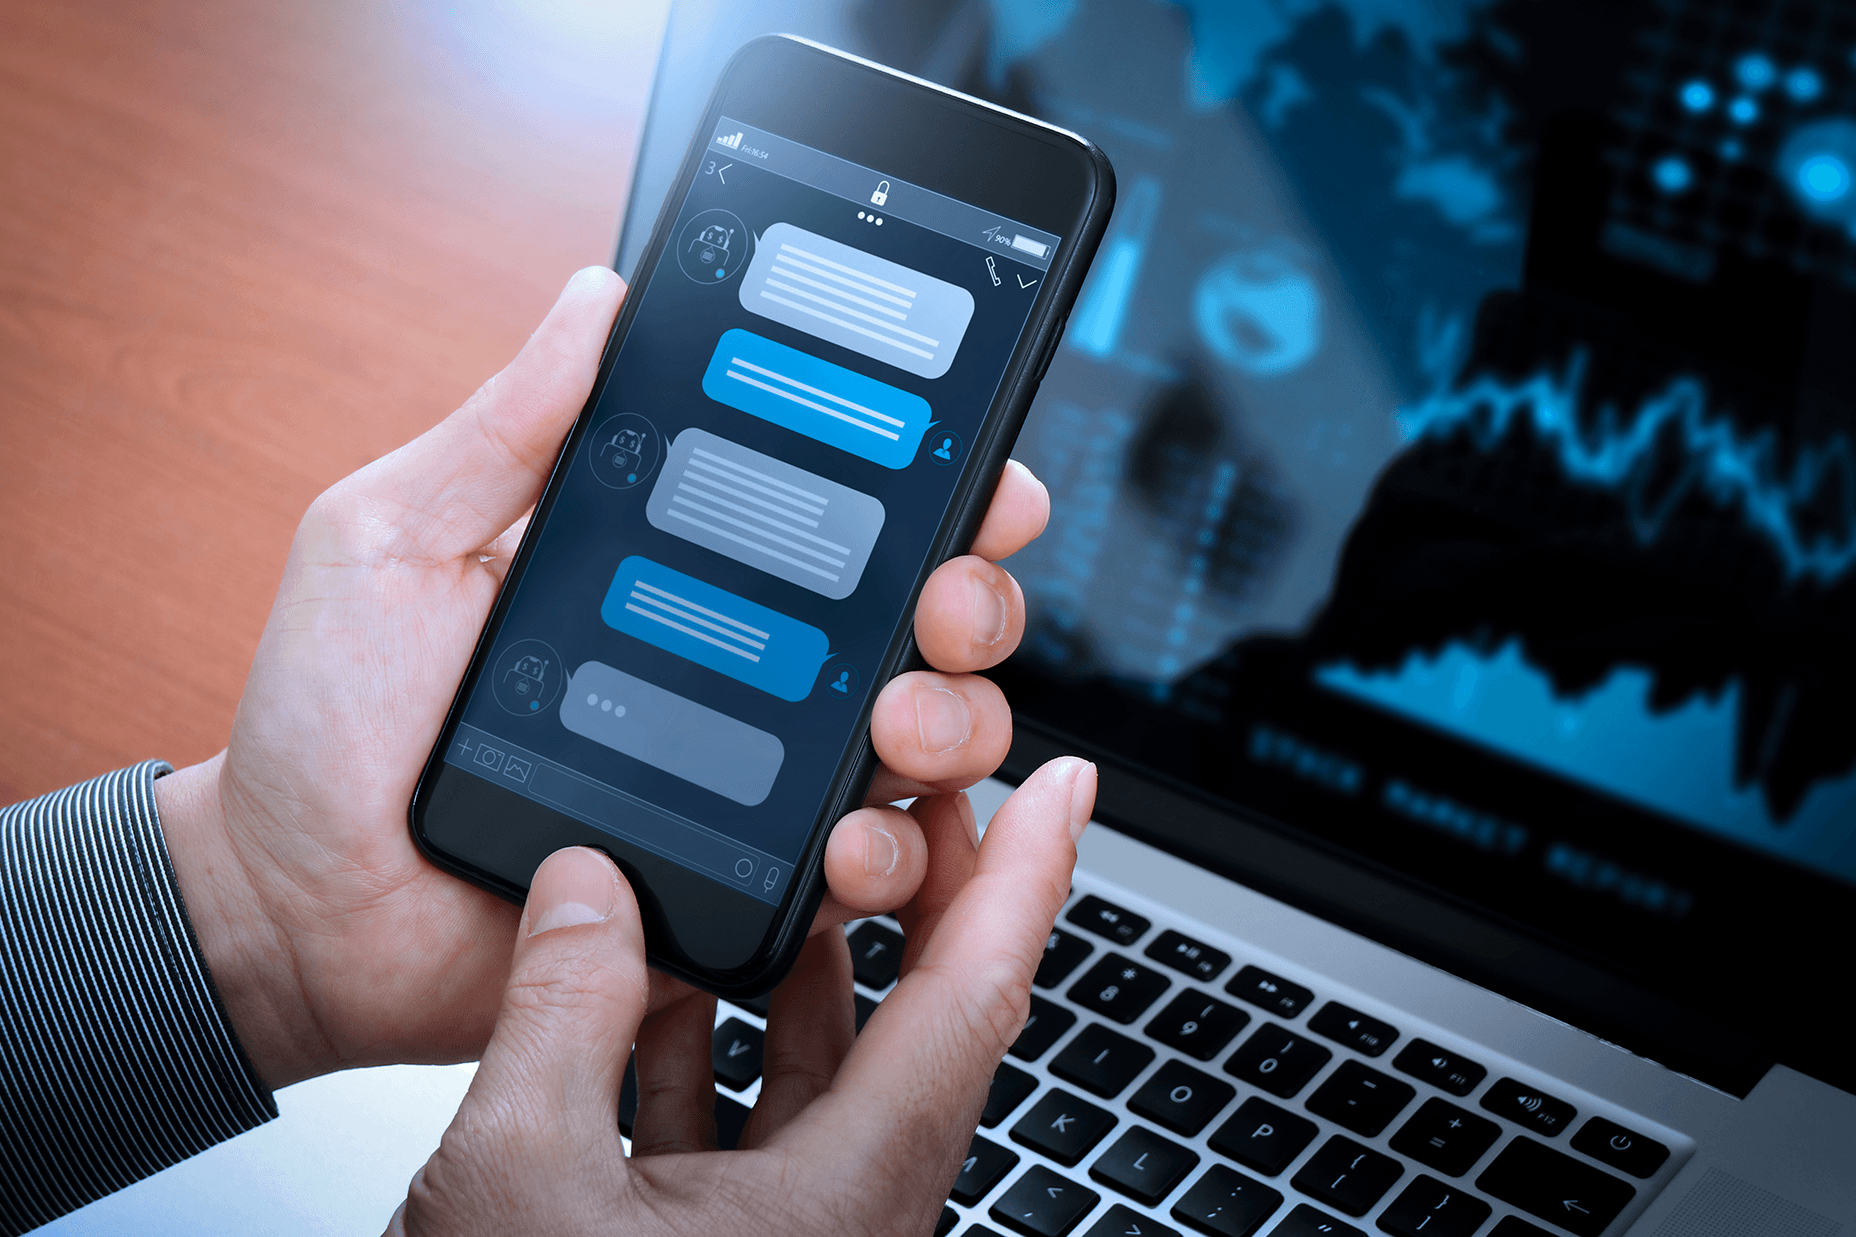 chatbot interaction on a mobile phone screen